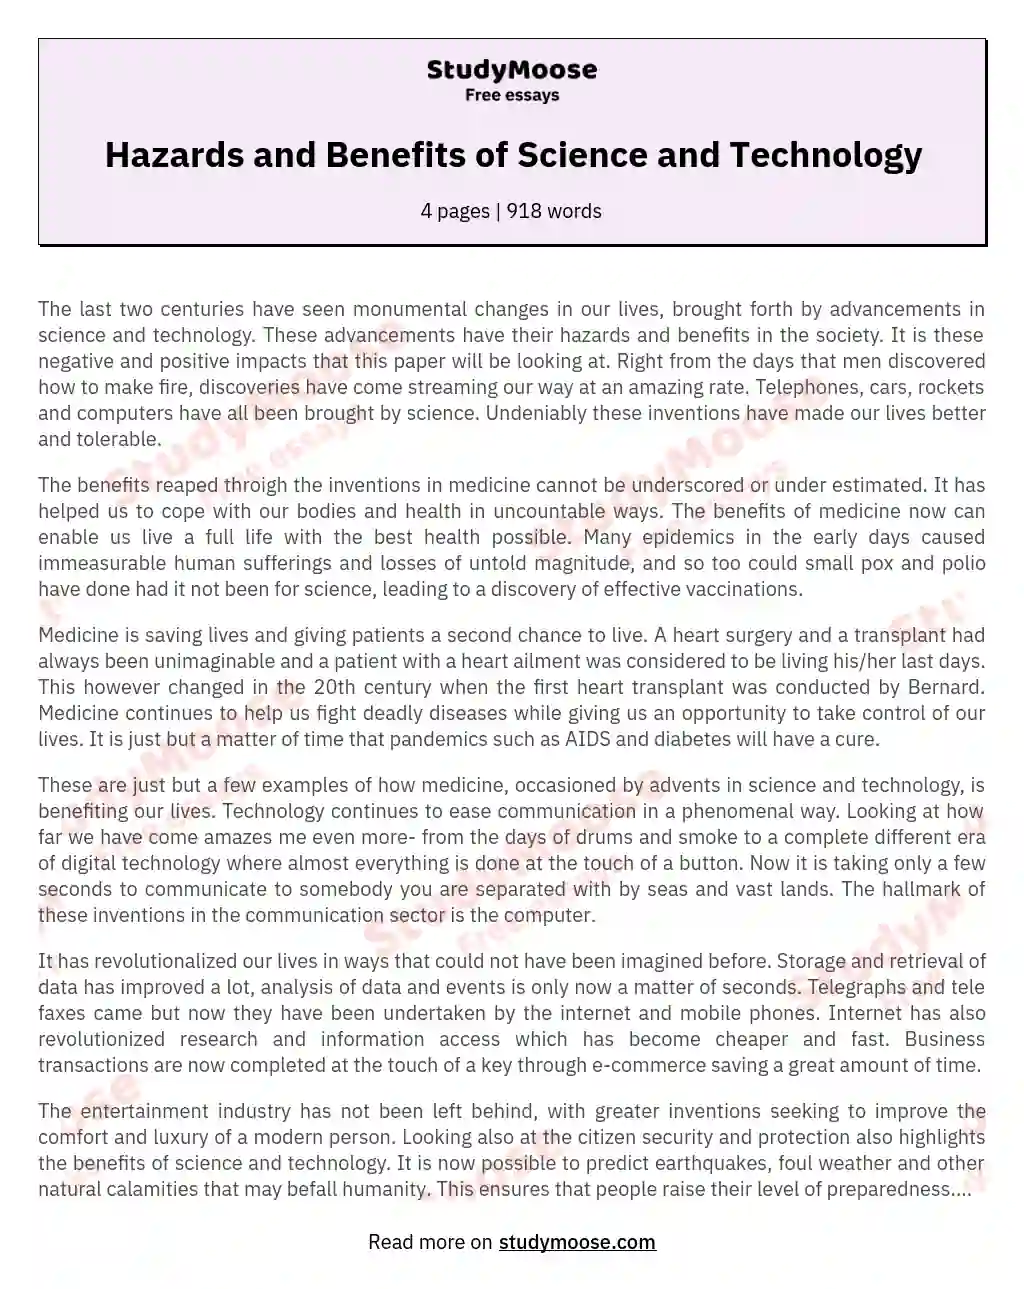 Hazards and Benefits of Science and Technology essay